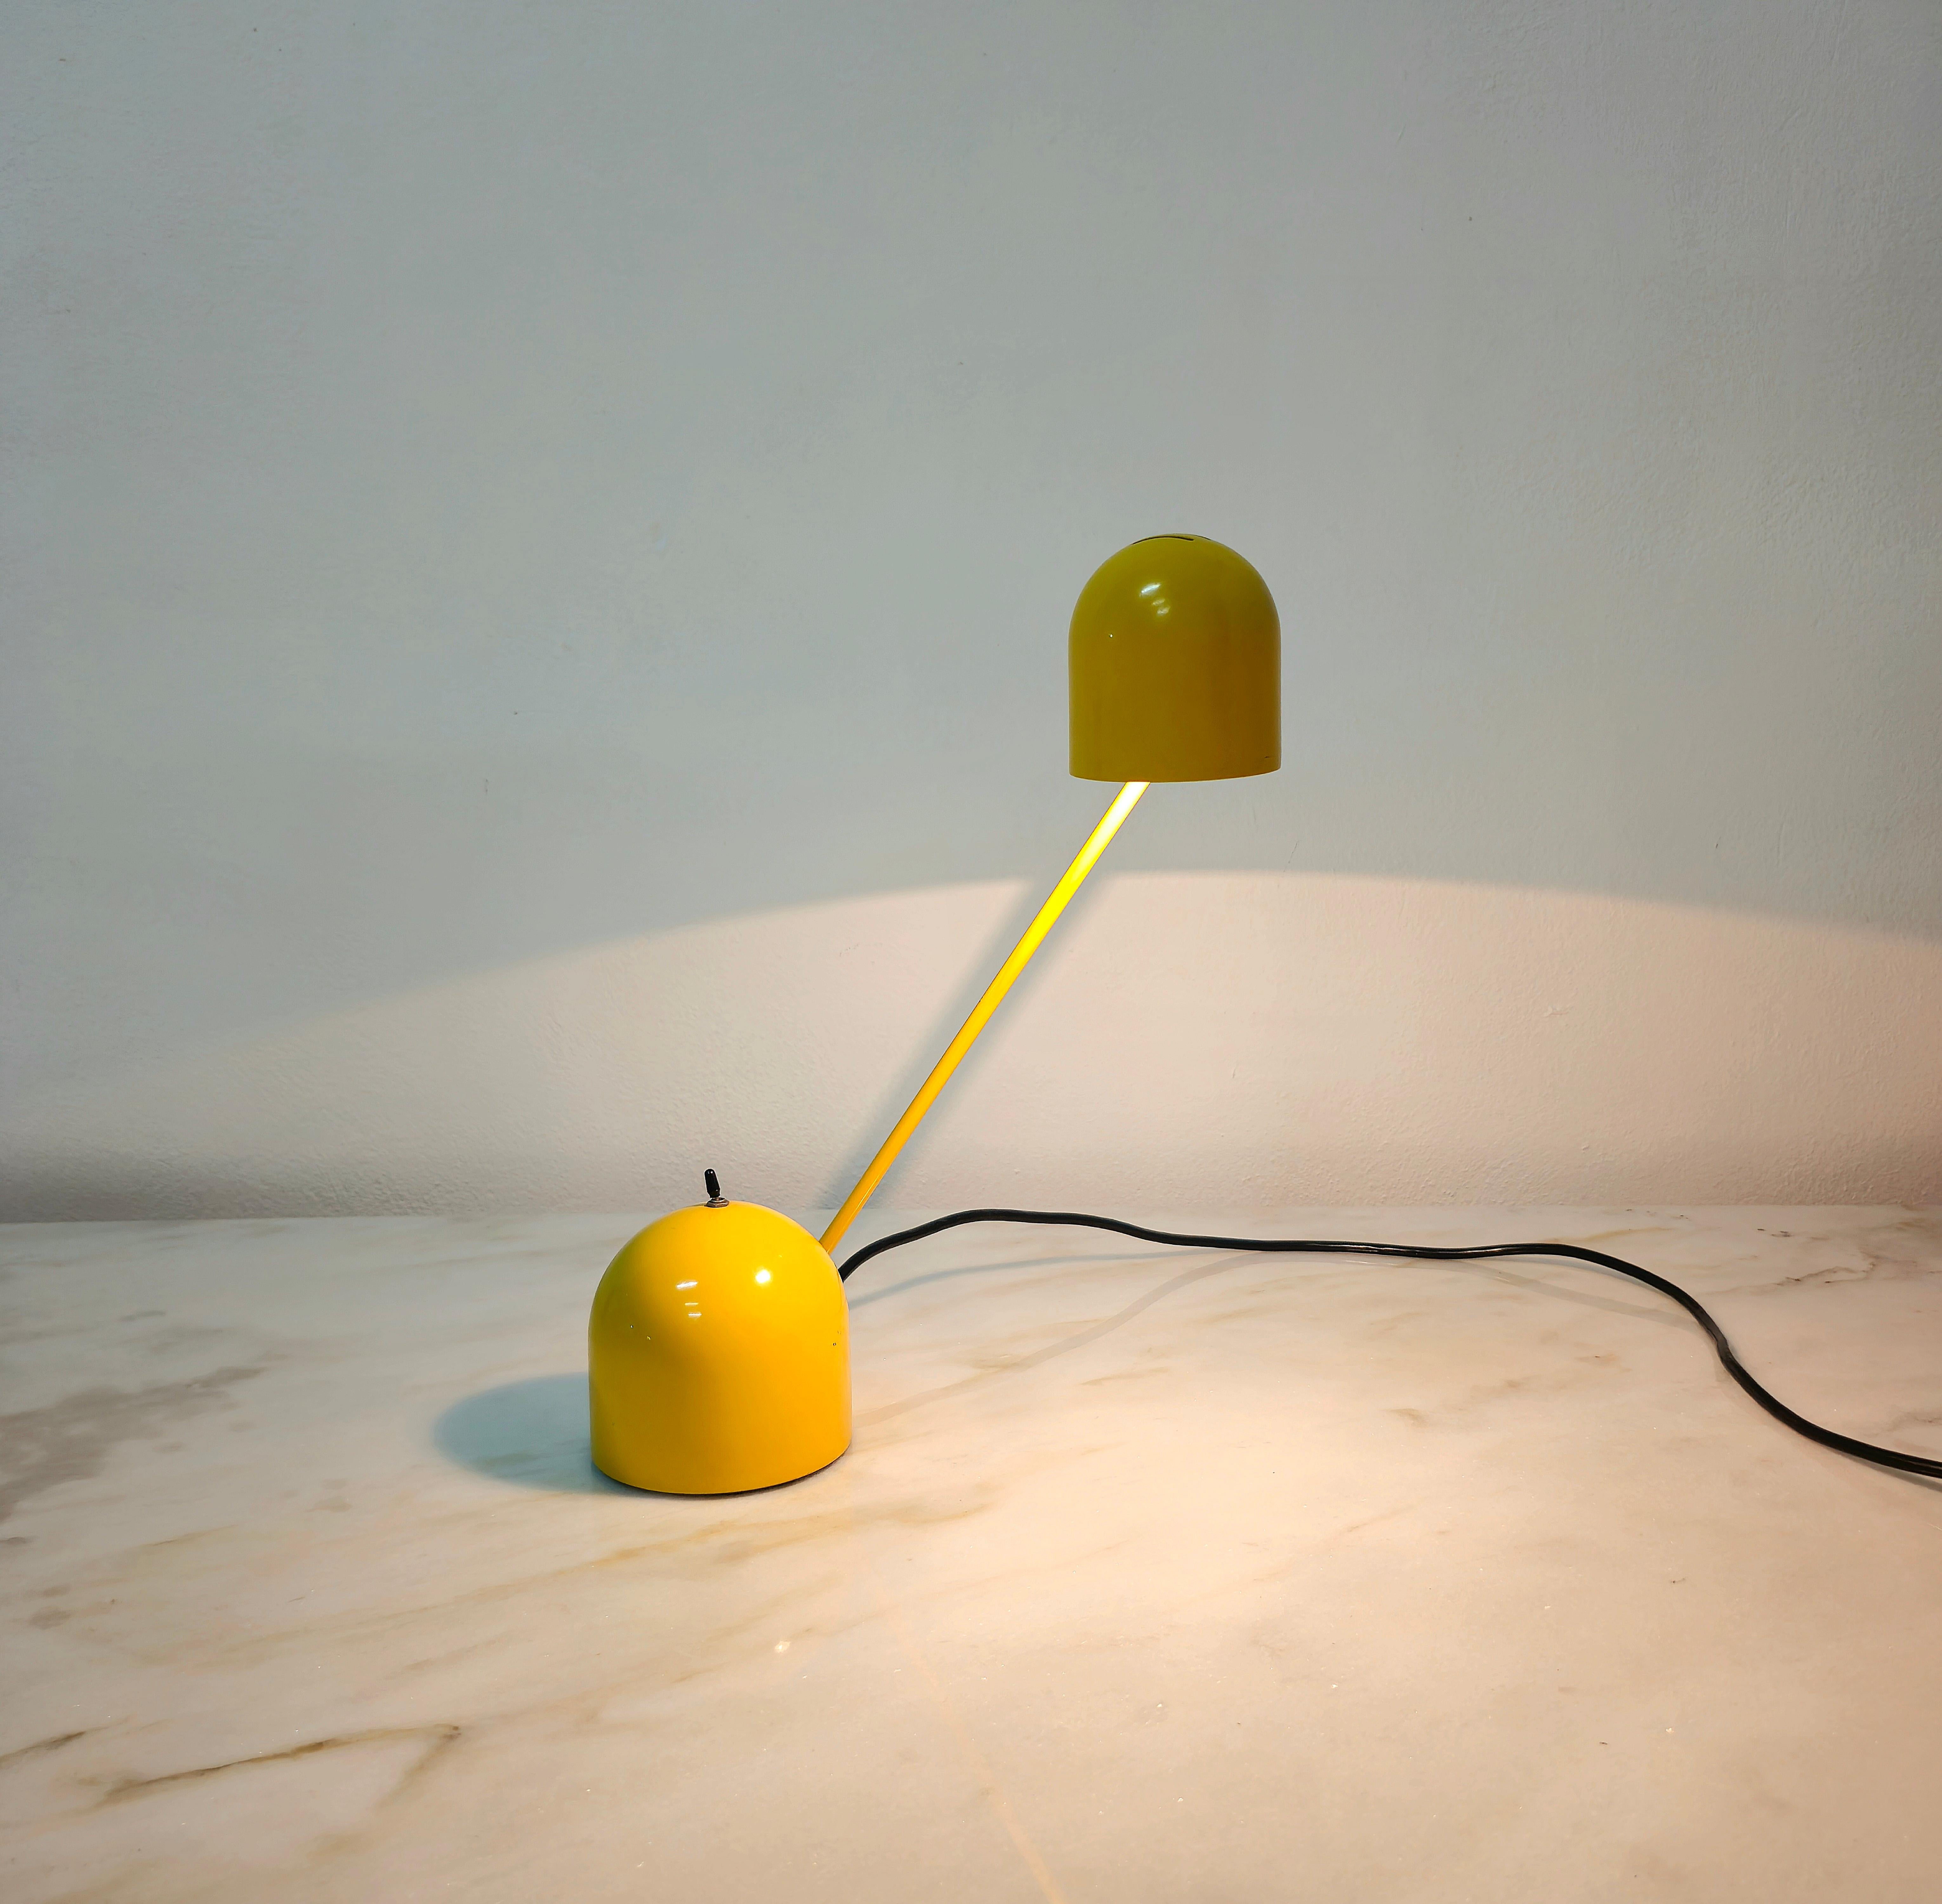 Table lamp made of metal and yellow enamelled aluminium. The particularity of this lamp is given by its multifunctionality, as both the arm and the diffuser can be directed, and thanks to the switch it is possible to decrease and increase the